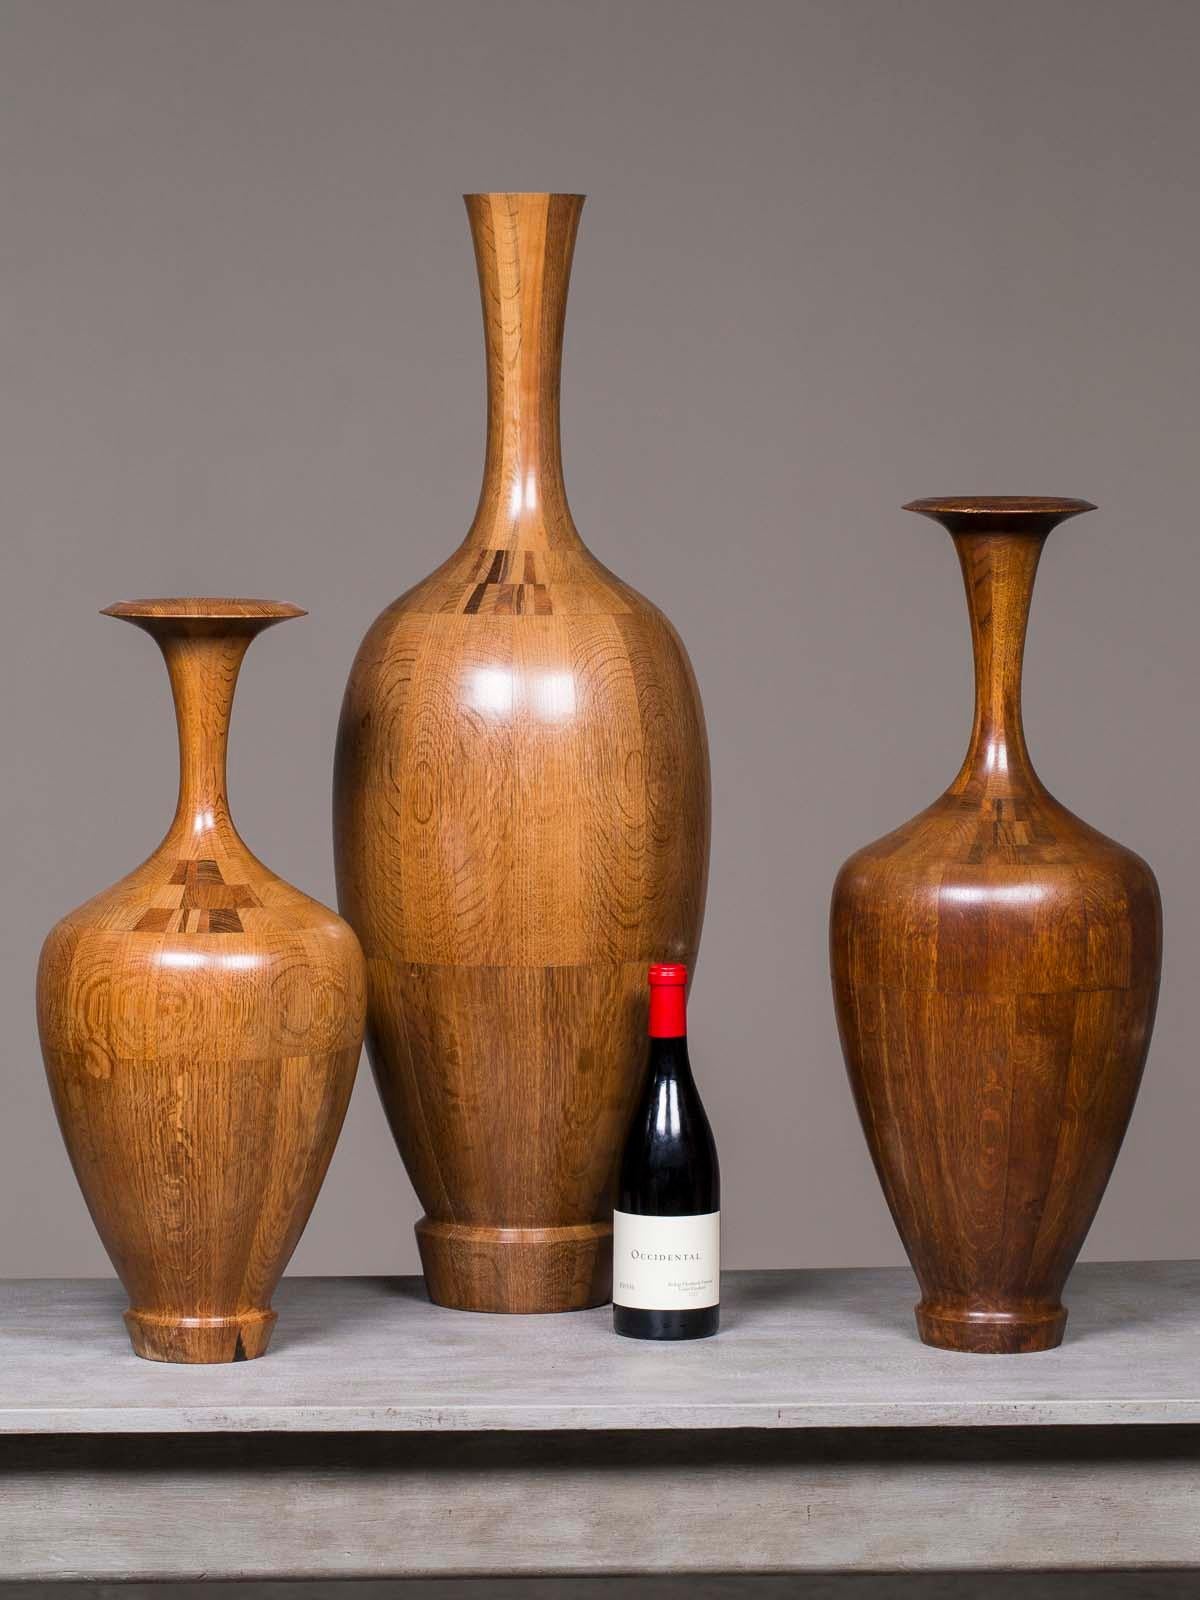 The striking modern quality of these three wood Art Deco vases made of specimen timber from Belgium circa 1940 and their superb craftsmanship lead to their attribution to the famed workshop of De Coene Frères in Kortrijk, Belgium. Please take the